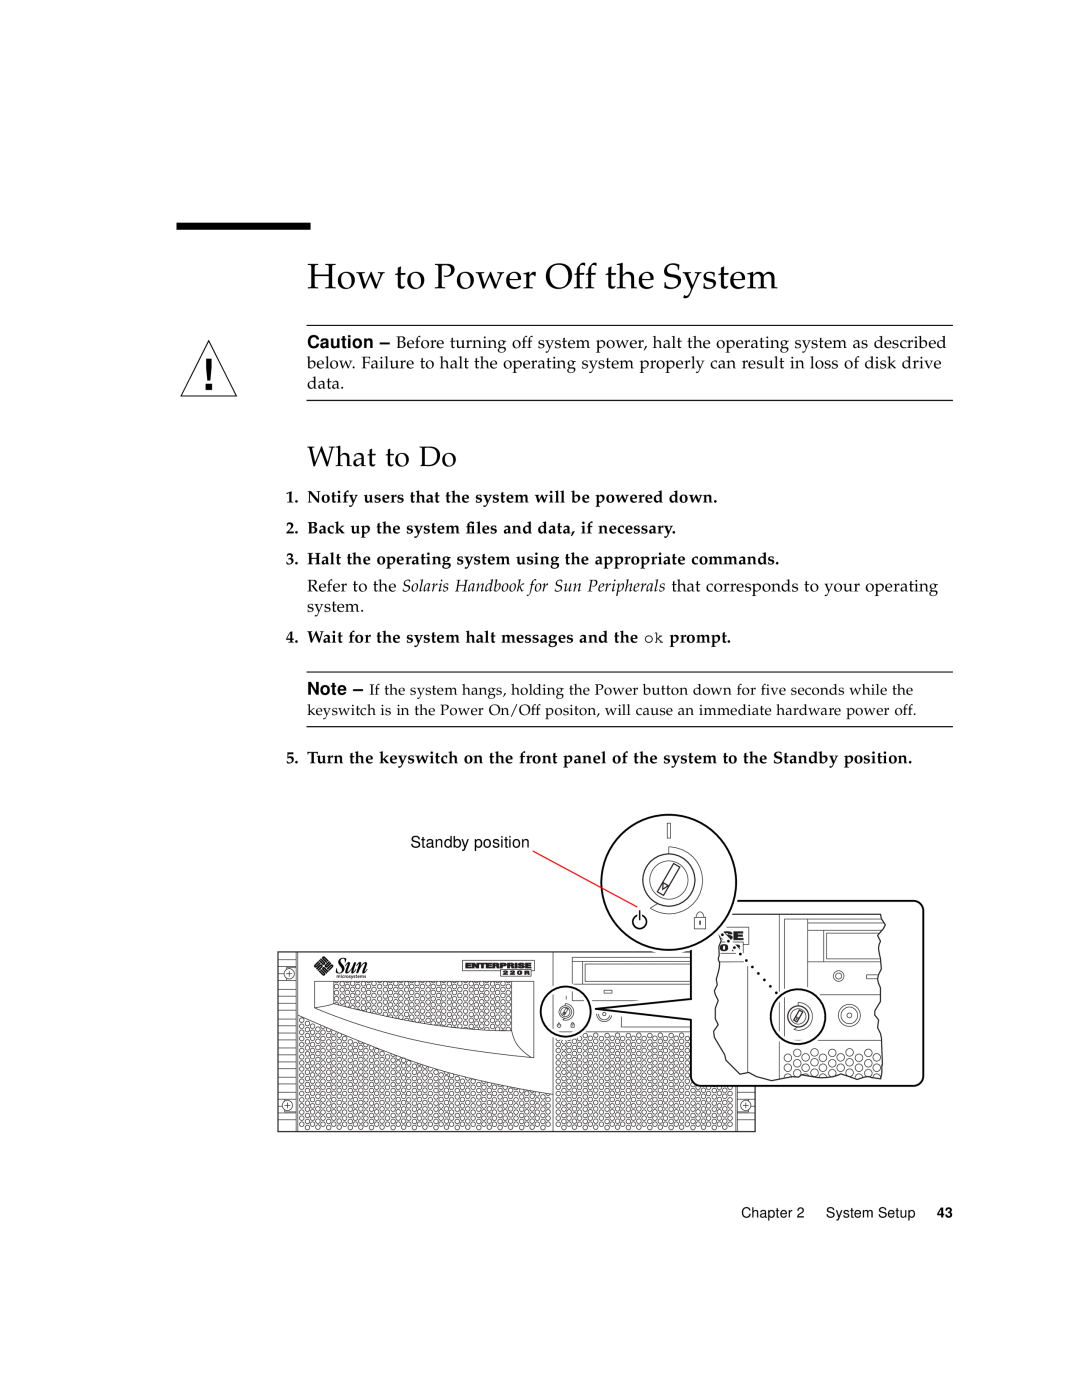 Sun Microsystems 220R manual How to Power Off the System, Notify users that the system will be powered down, What to Do 